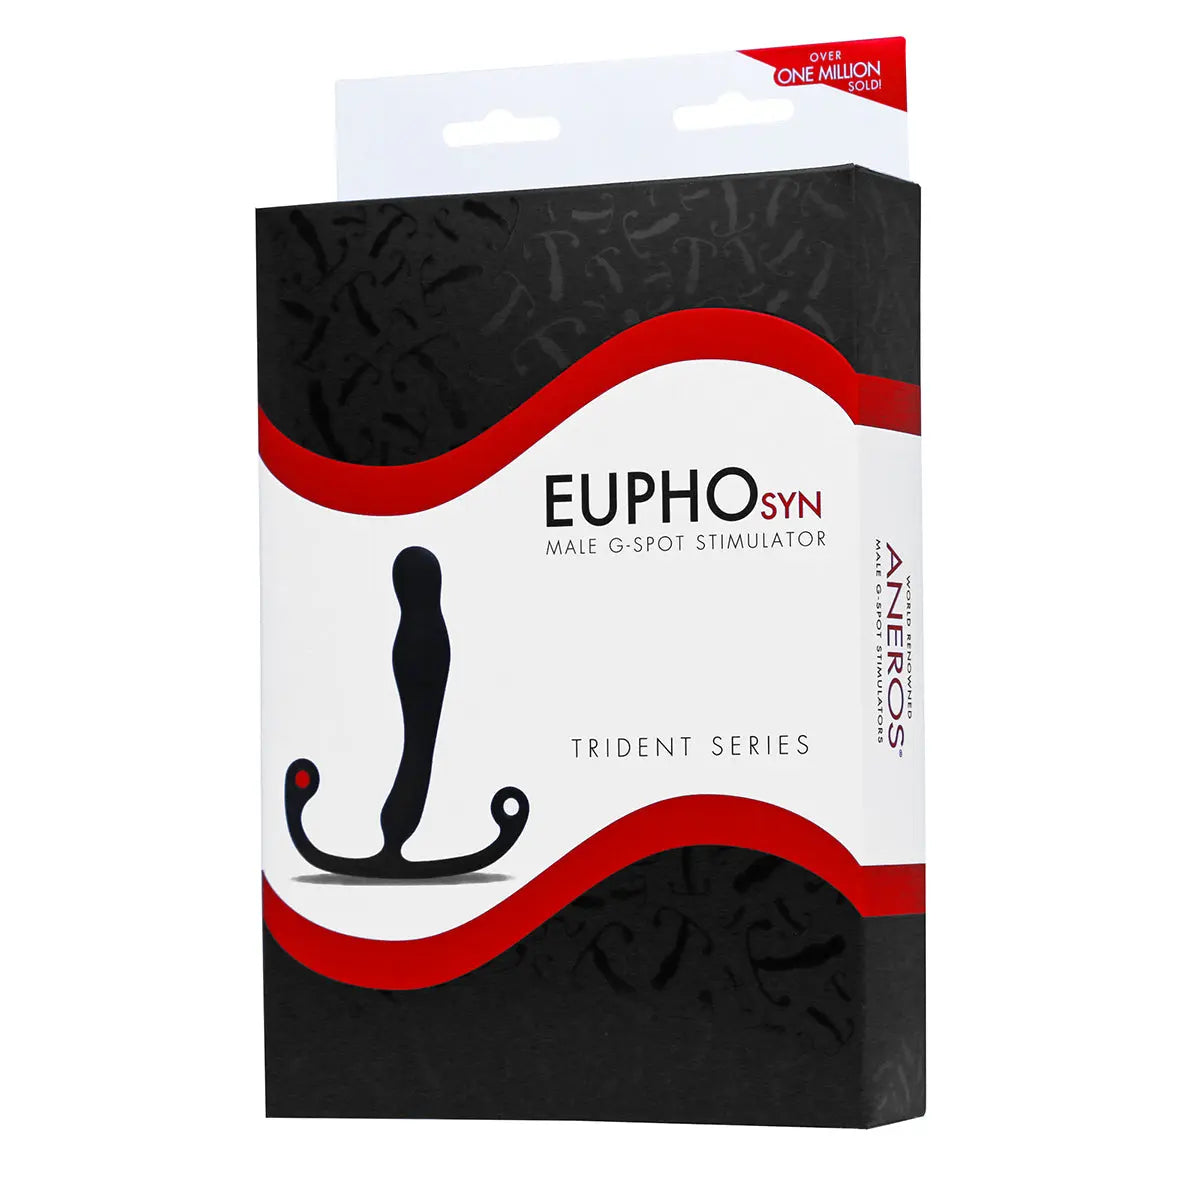 Eupho Syn Trident Prostate Massager free shipping - Beyond Delights